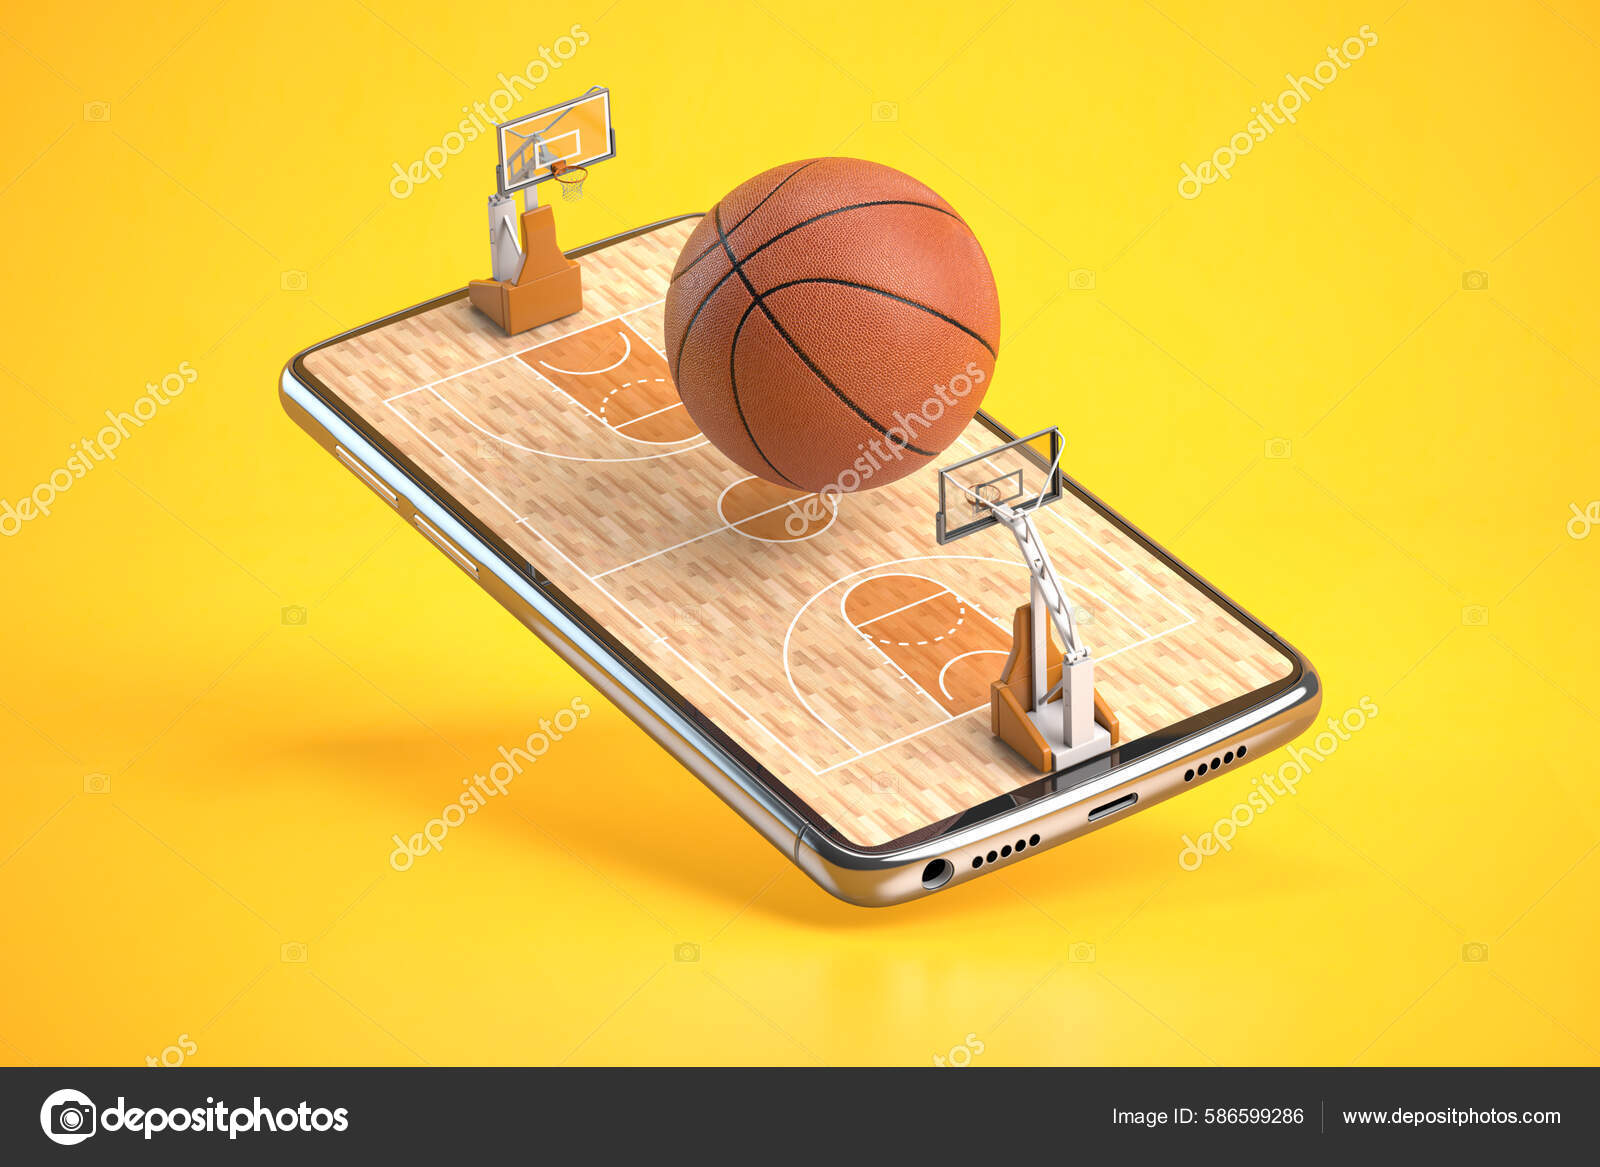 Download - Basketball ball on a basketball court on mobile phone or smartphone. Video game, betting online and watching match online concept. 3d illustration - Stock Image